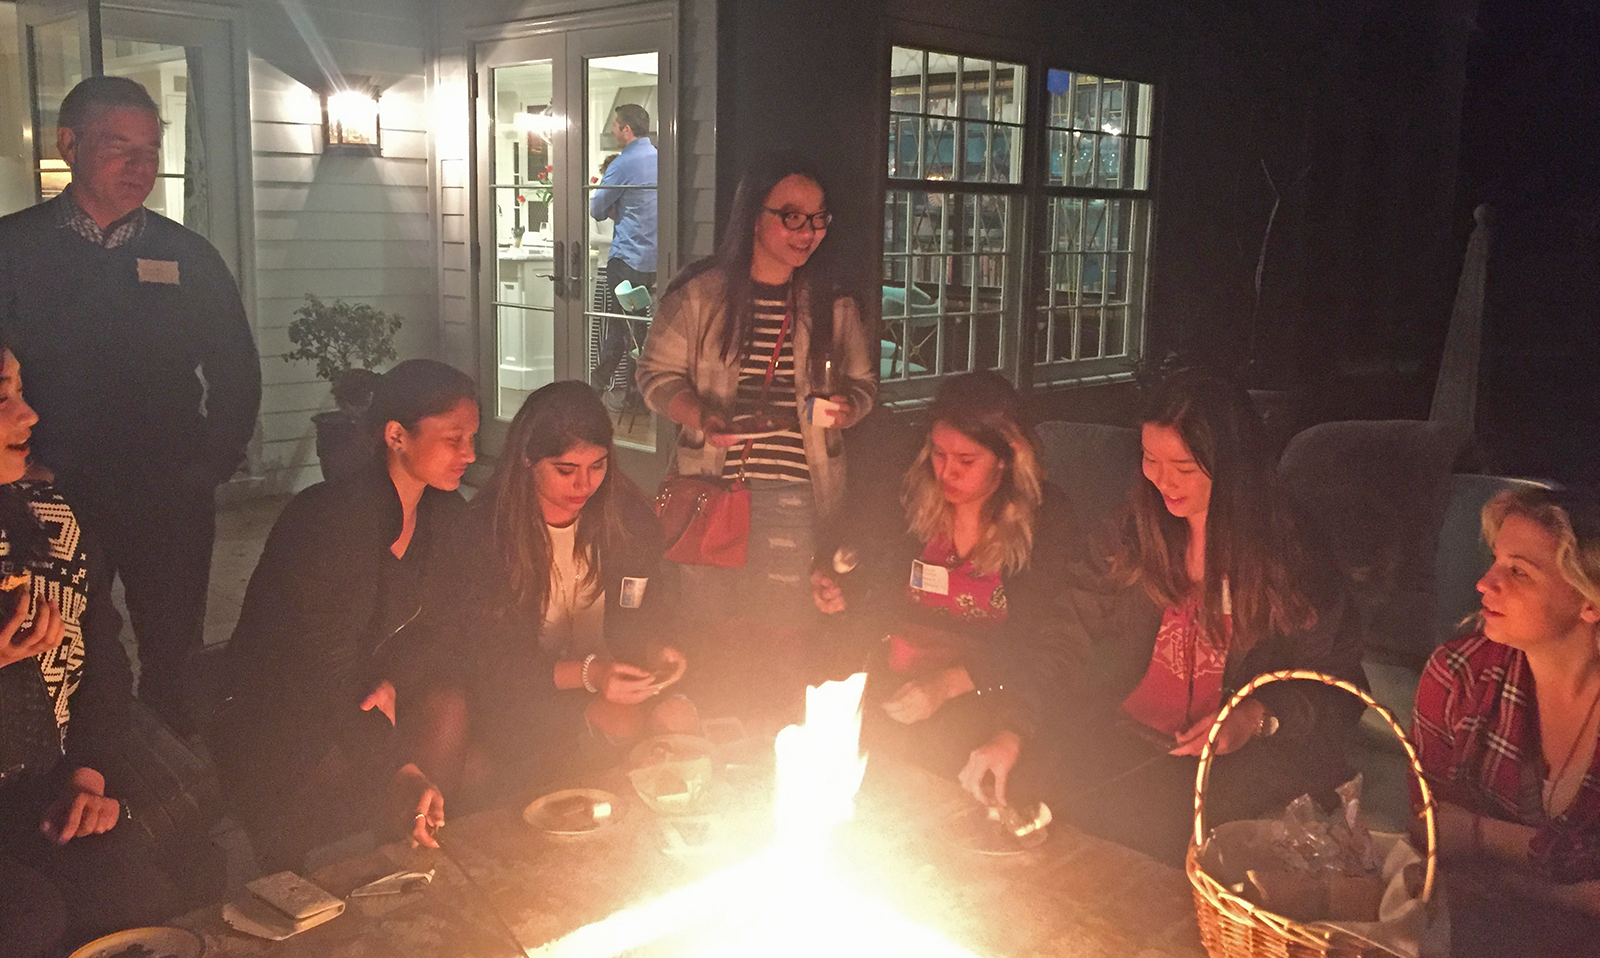 Dinner guests make s’mores after dinner in the Calverts’ home.